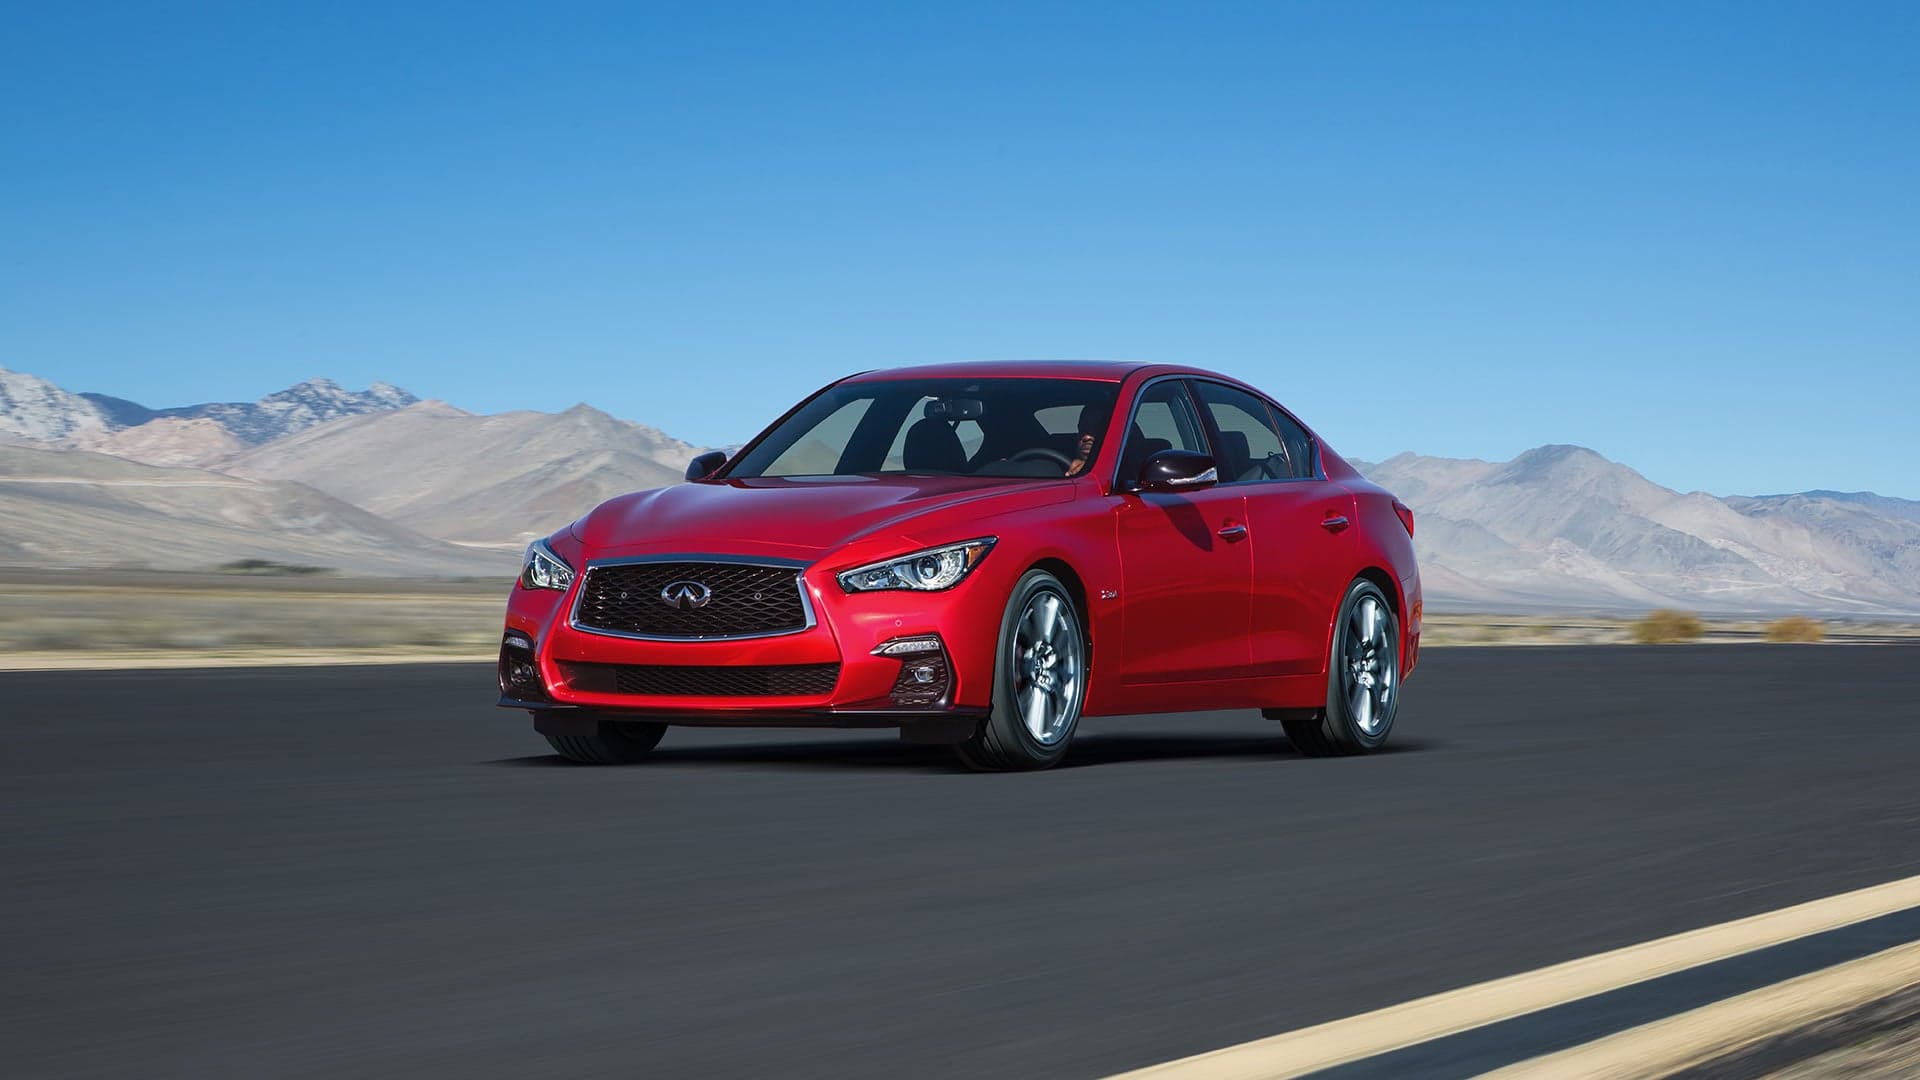 2018 Infiniti Q50 Set to Debut With New ProPilot Self-Driving System